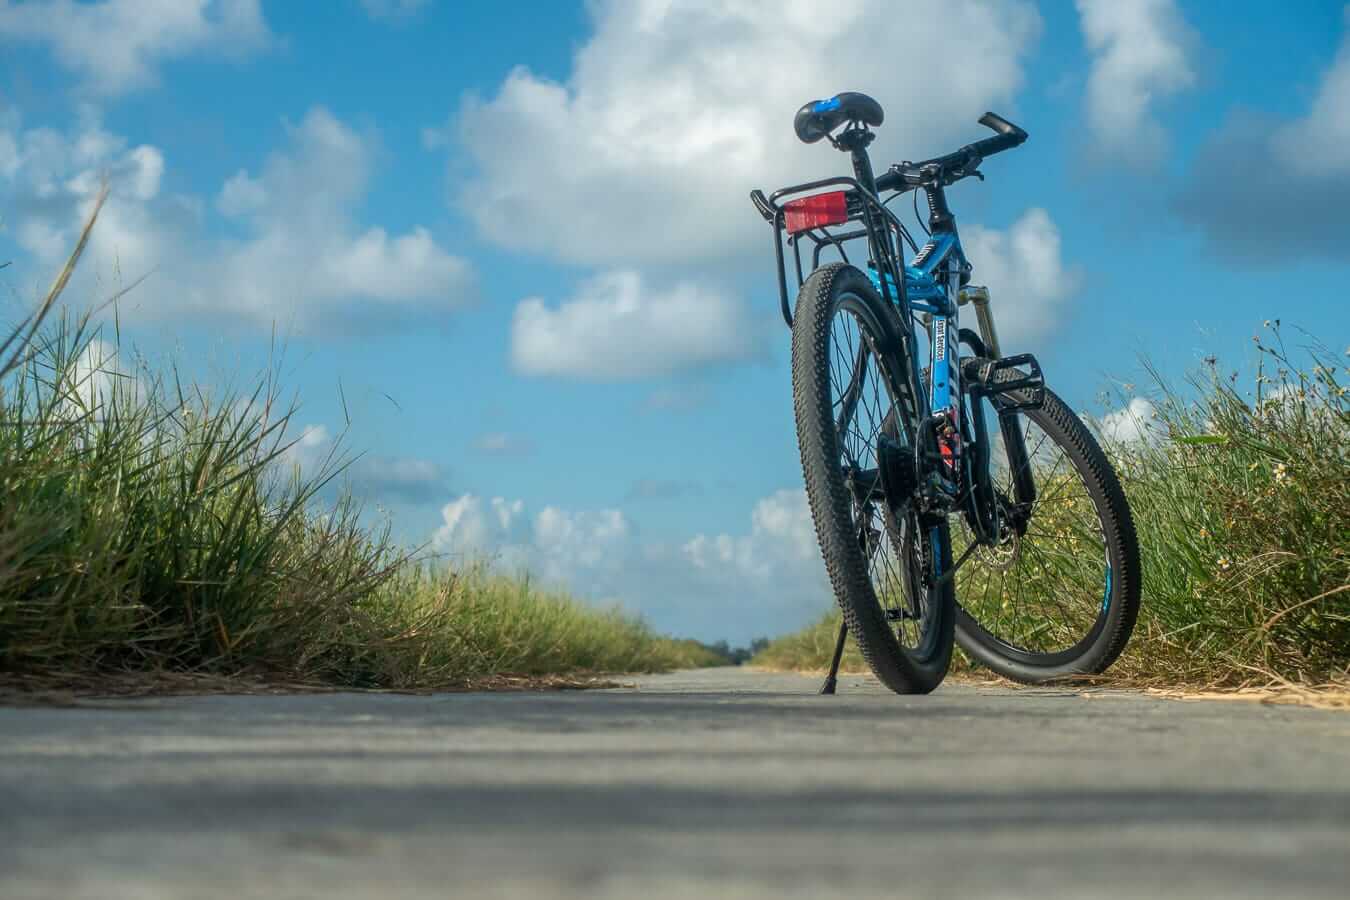 Bikes for rent: Hoi An cycling